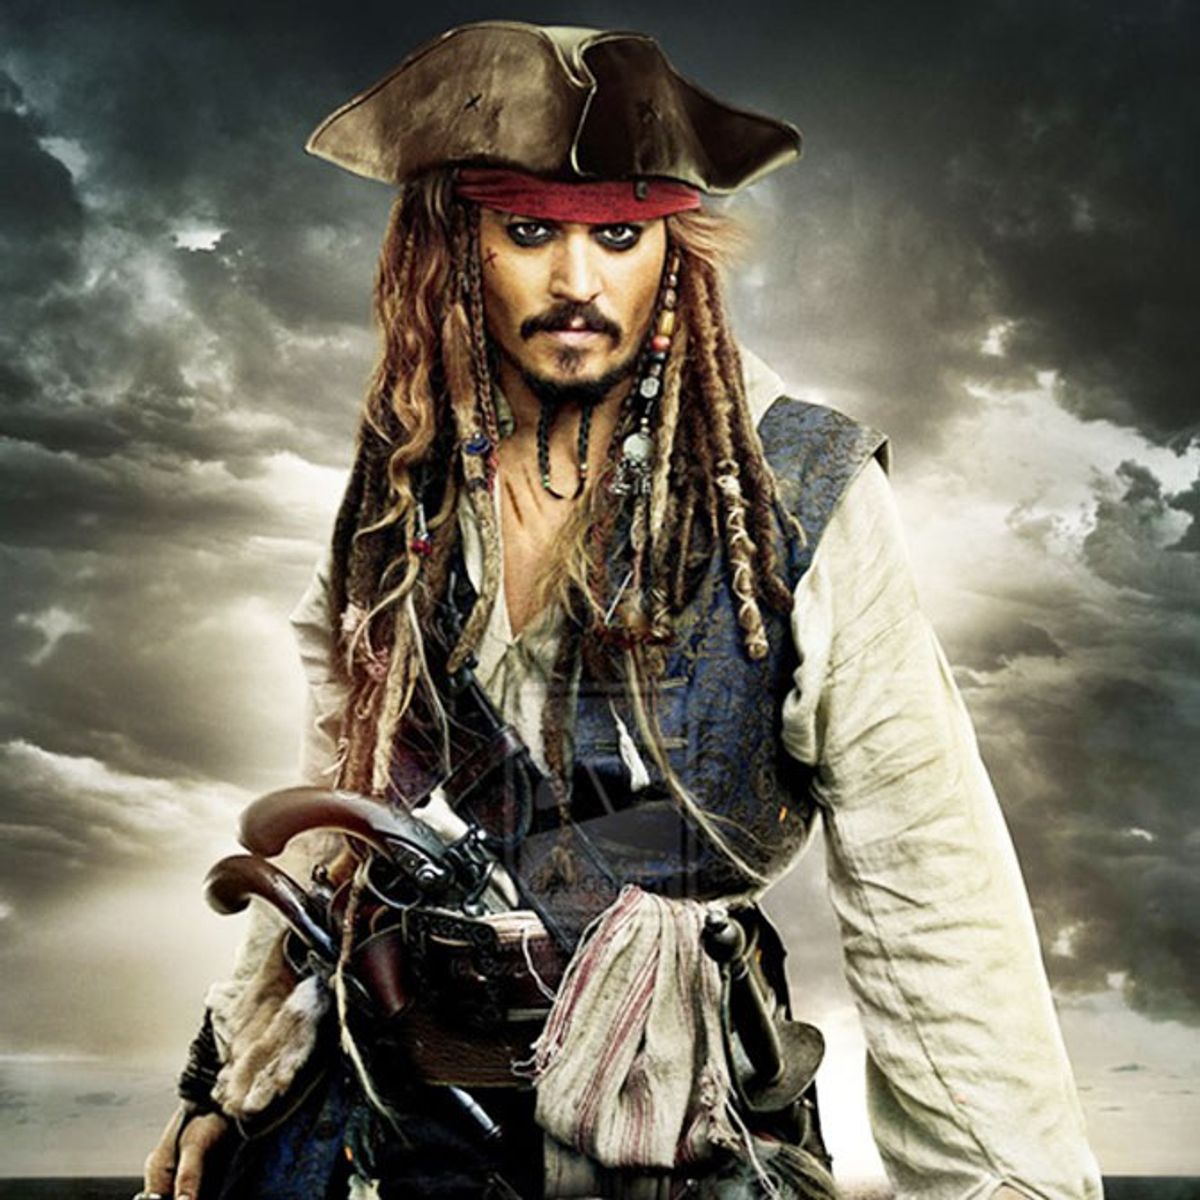 Life Lessons from Captain Jack Sparrow